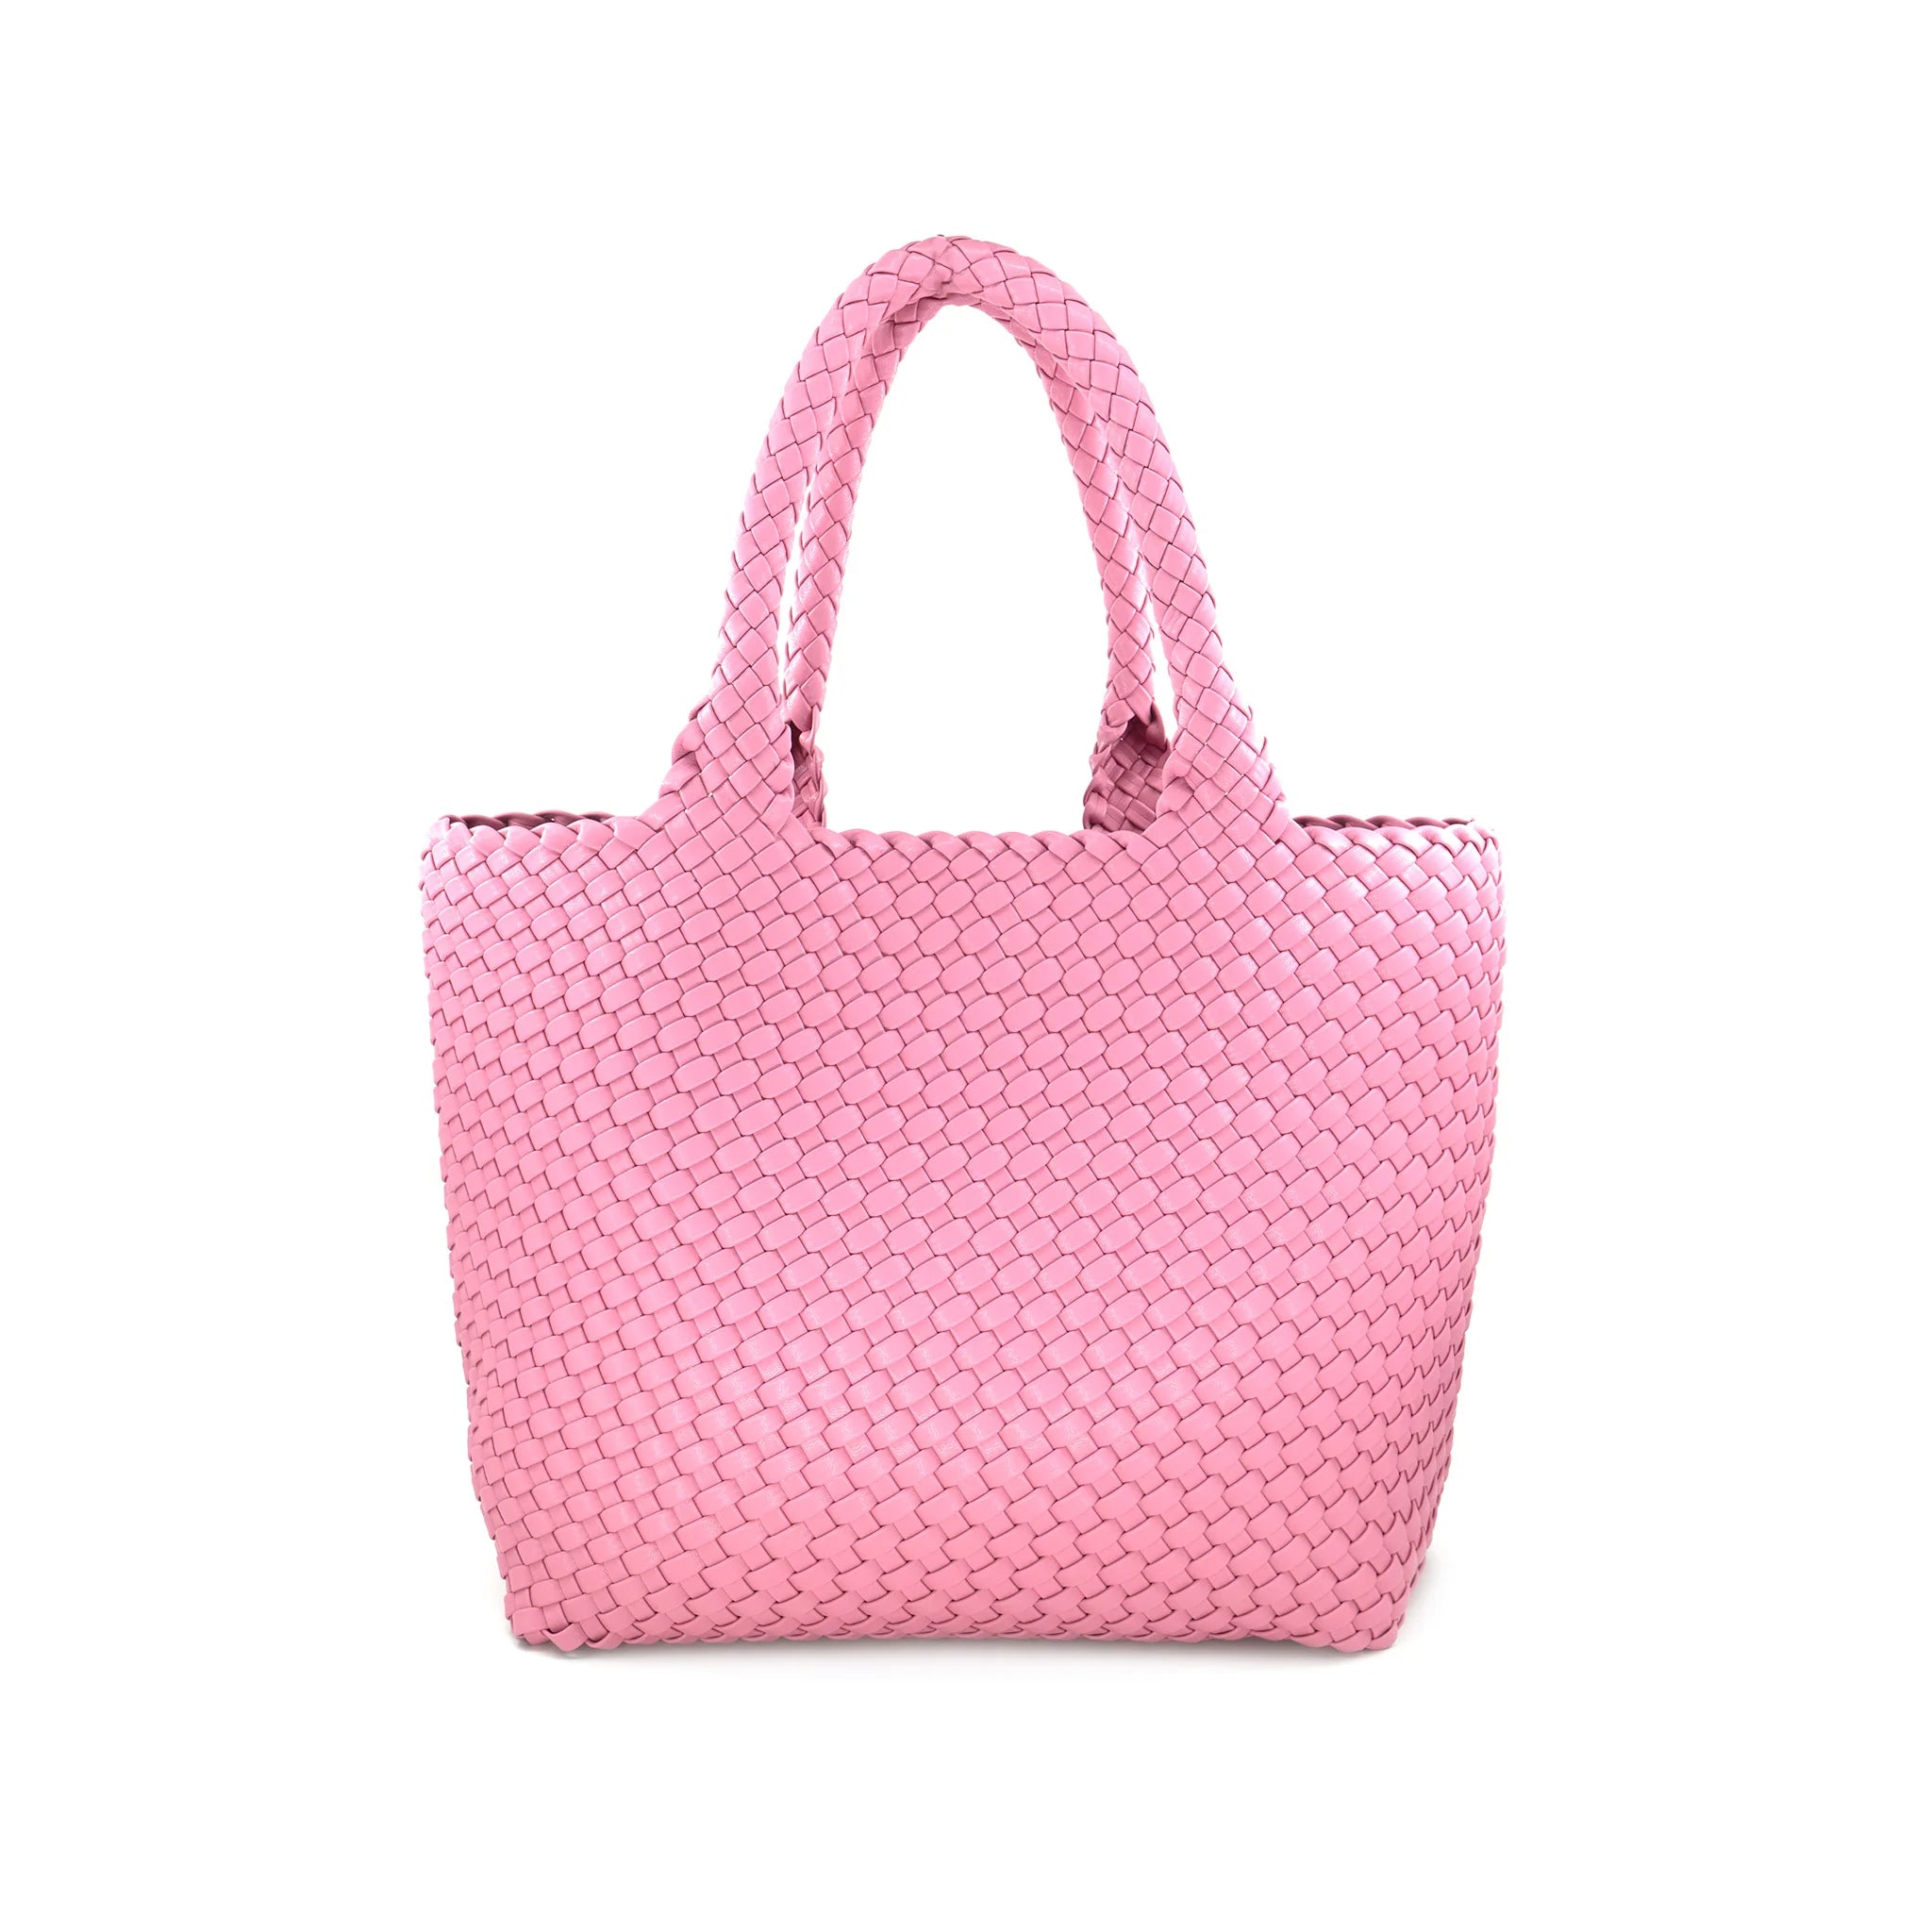 Woven Tote in Pink